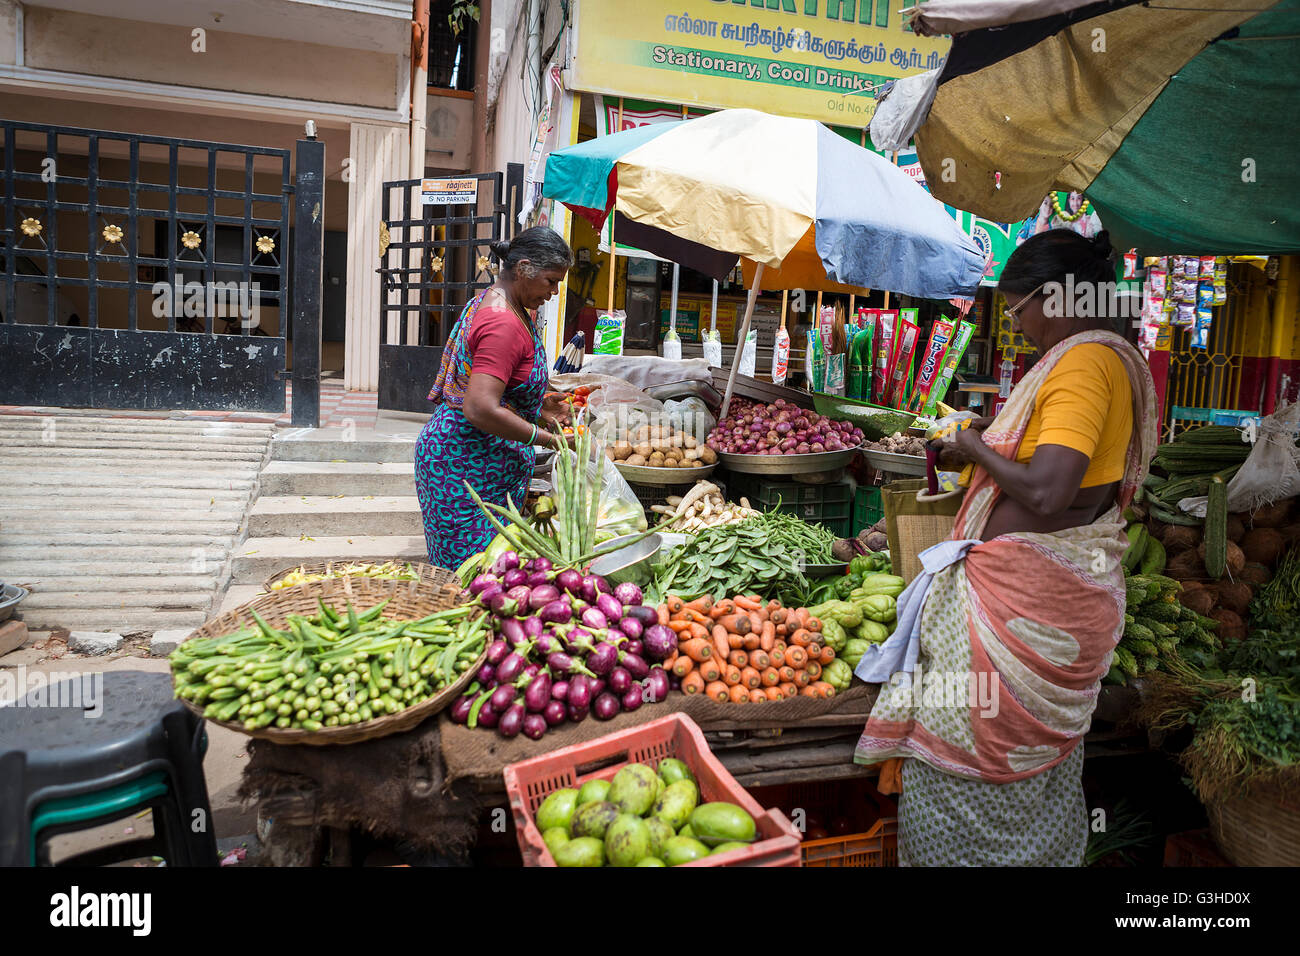 One Indian lady buying and one lady selling fruit and vegetables on a street stall in Mylapore, Chennai, Tamil Nadu, India, Asia Stock Photo